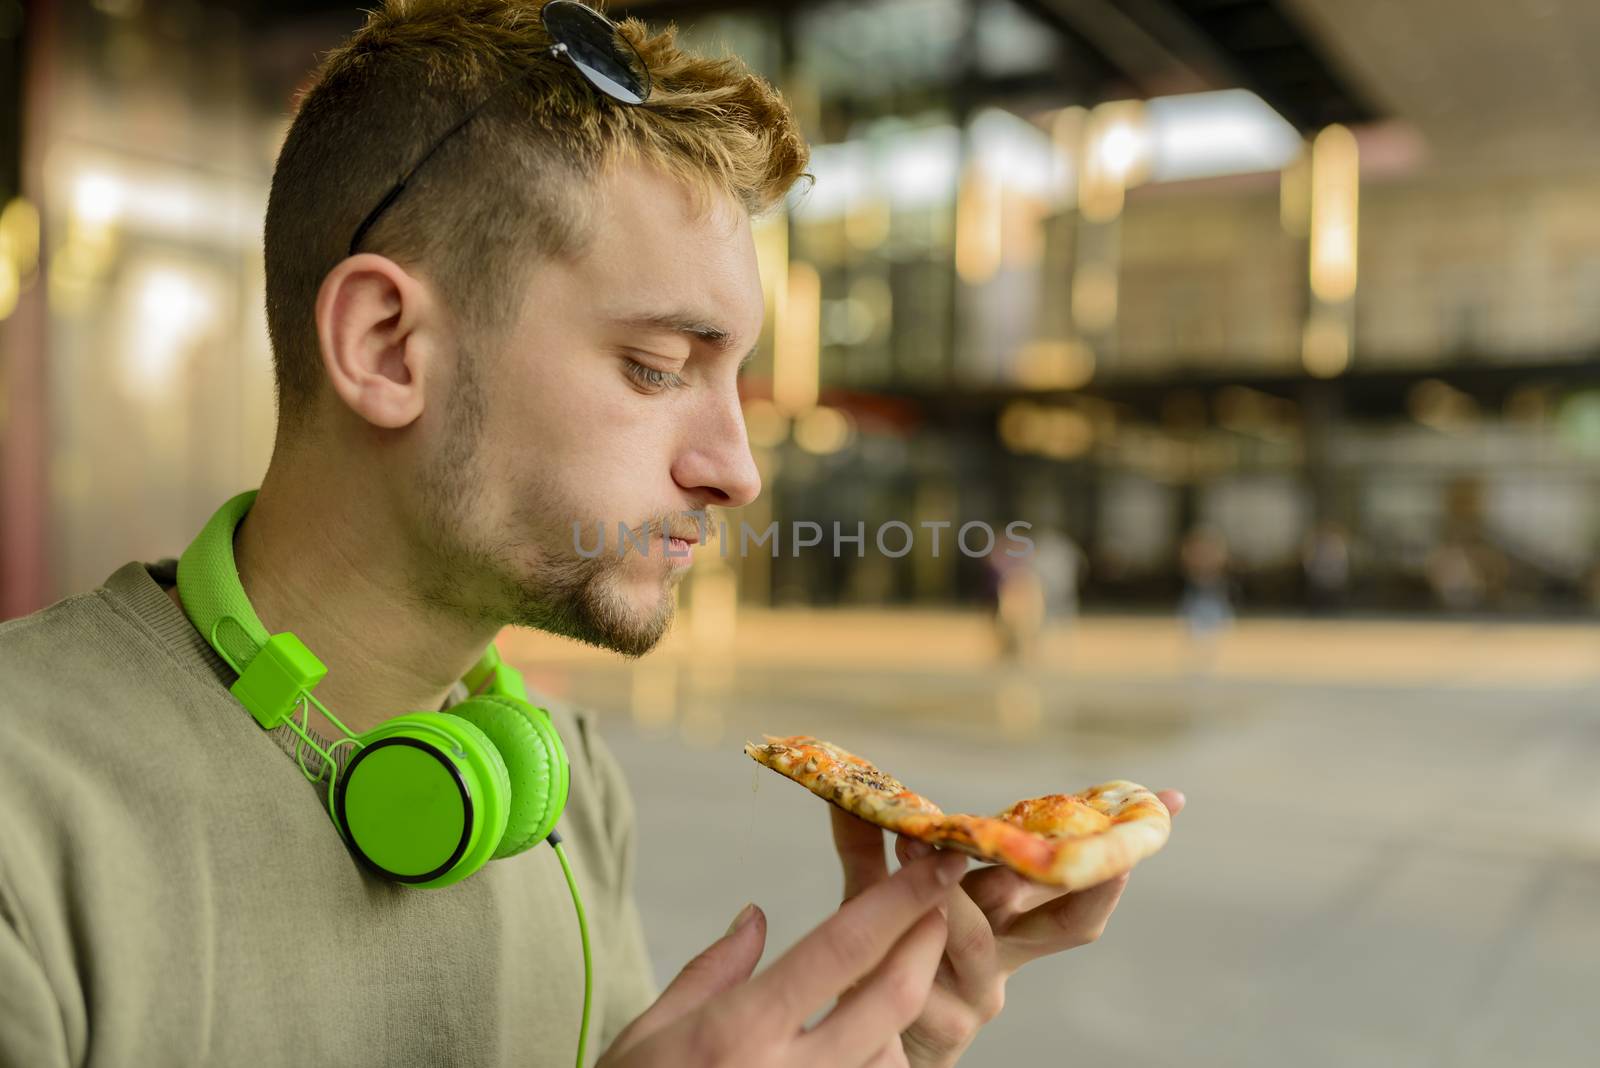 Handsome young man with headphones eating pizza in the city street